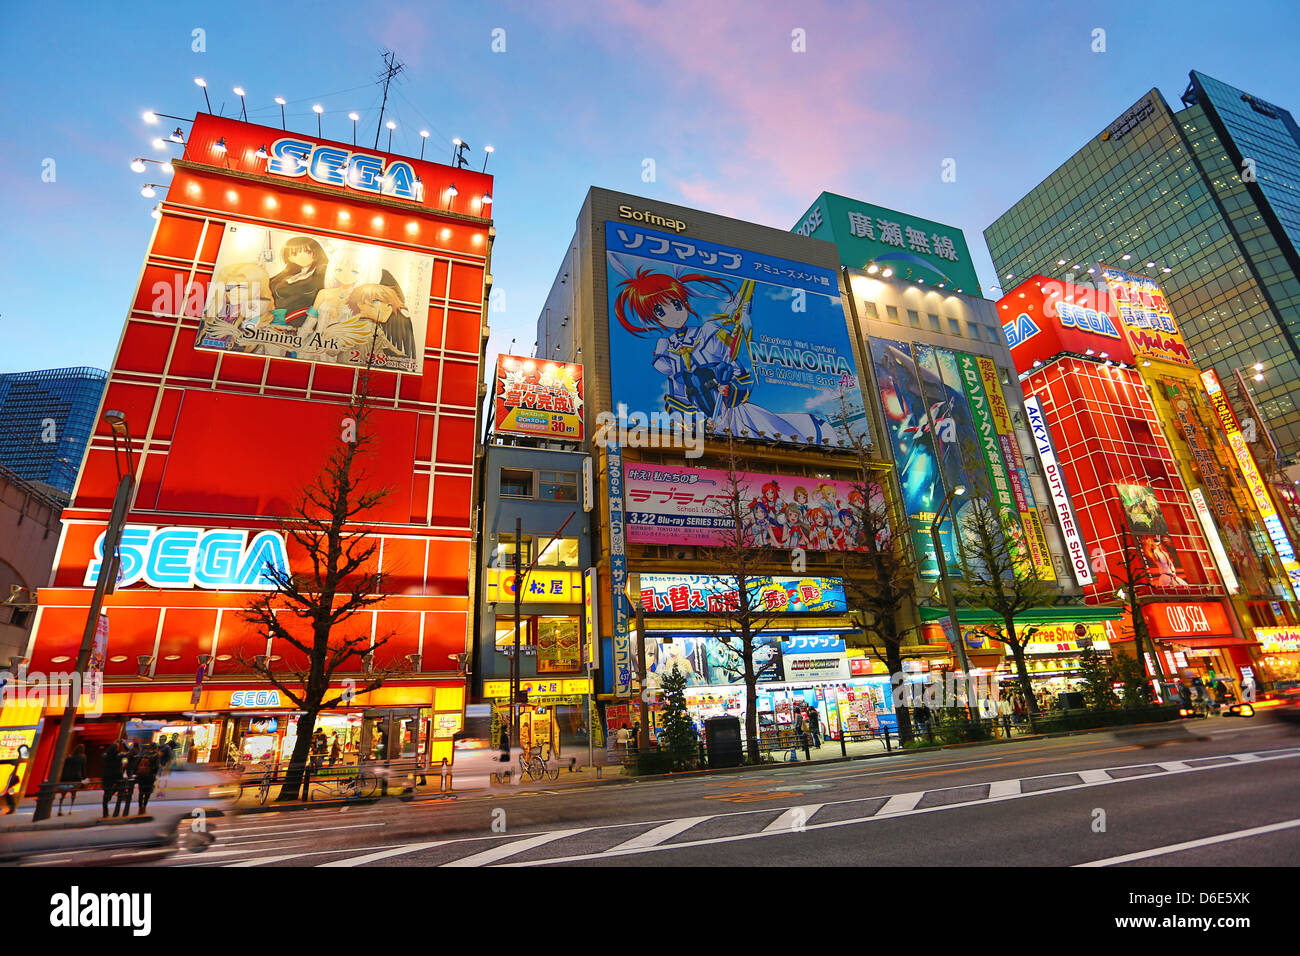 Night scene of buildings, signs and lights in the street in Akihabara, Electric Town, Tokyo, Japan Stock Photo